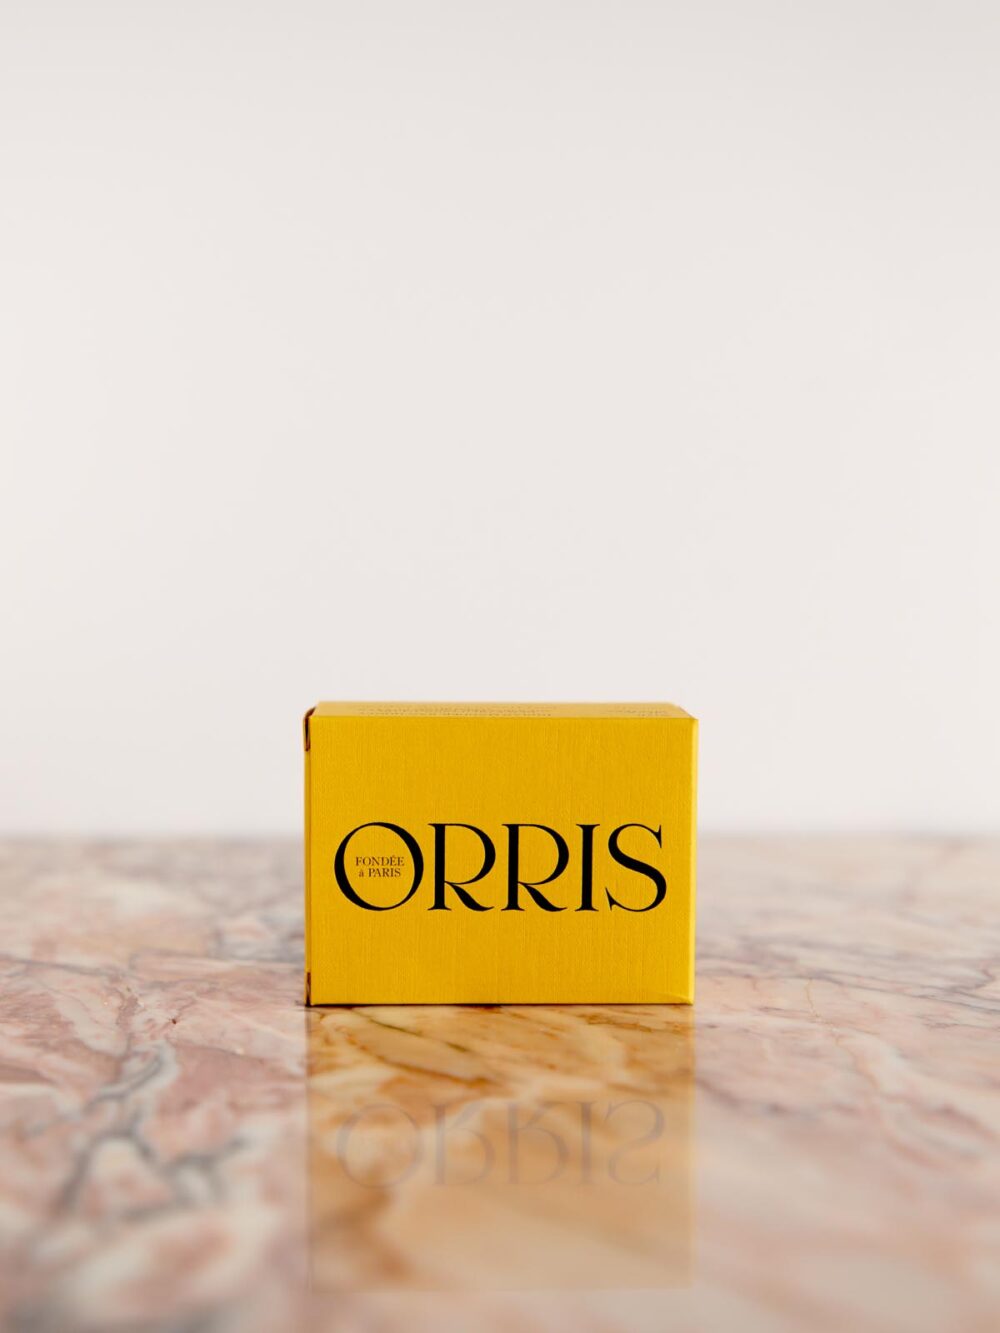 Le Déesse - Cleansing Bar by Orris box on pink marble